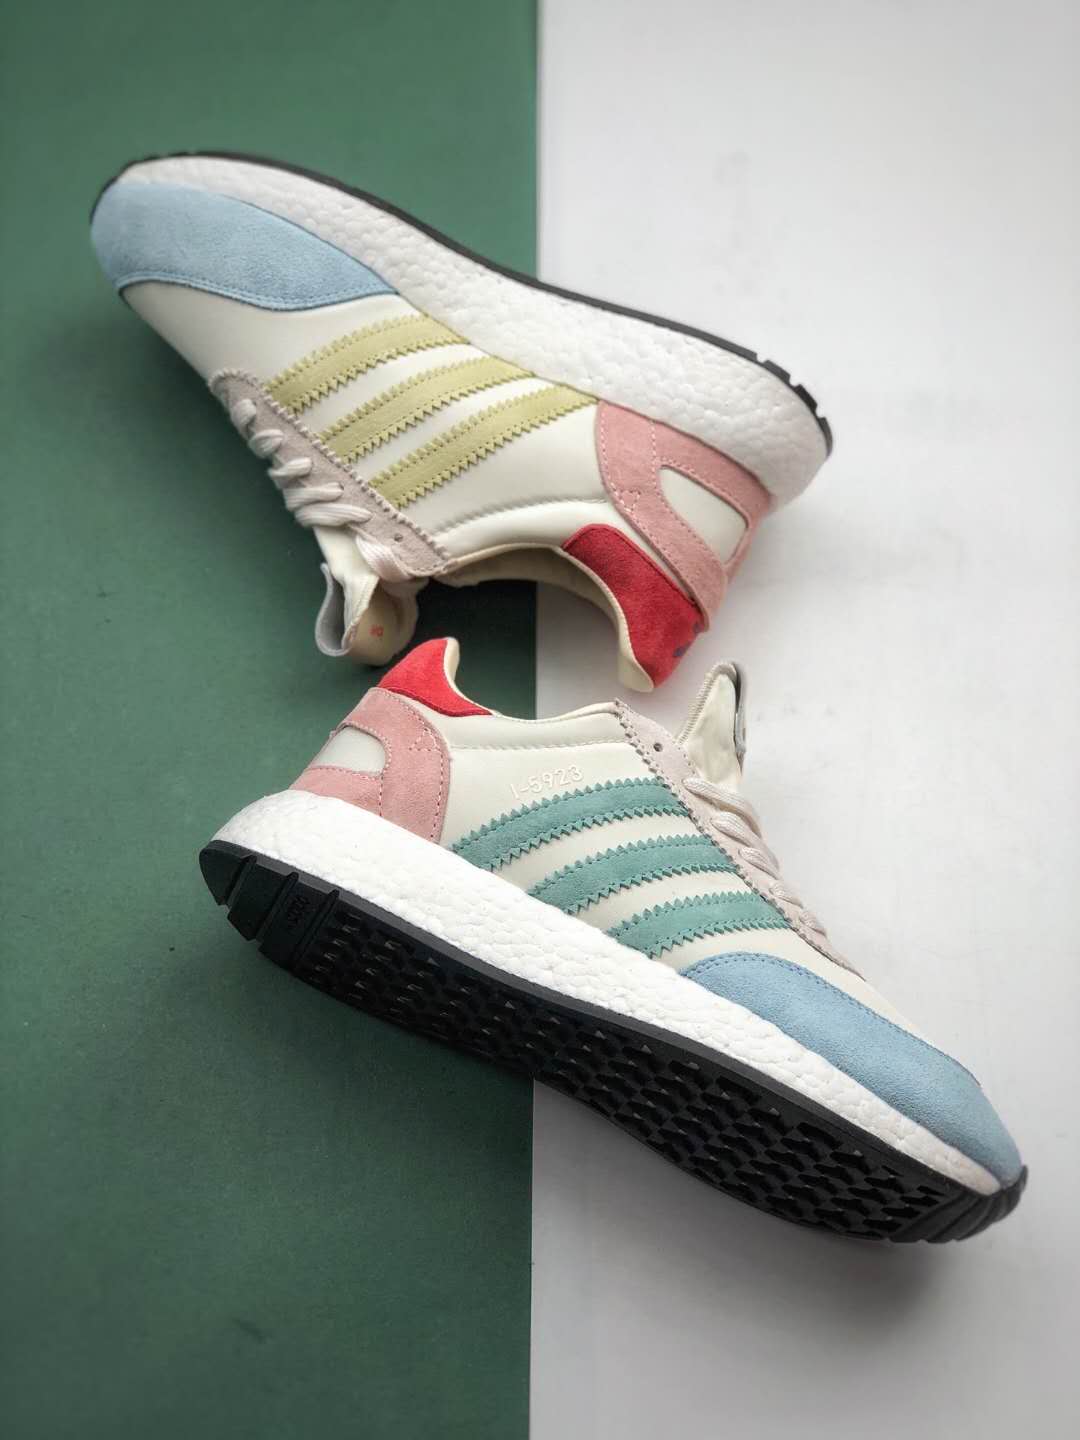 Adidas I-5923 Pride Pack B41984: Celebrate LGBTQ+ Pride with Stylish Sneakers